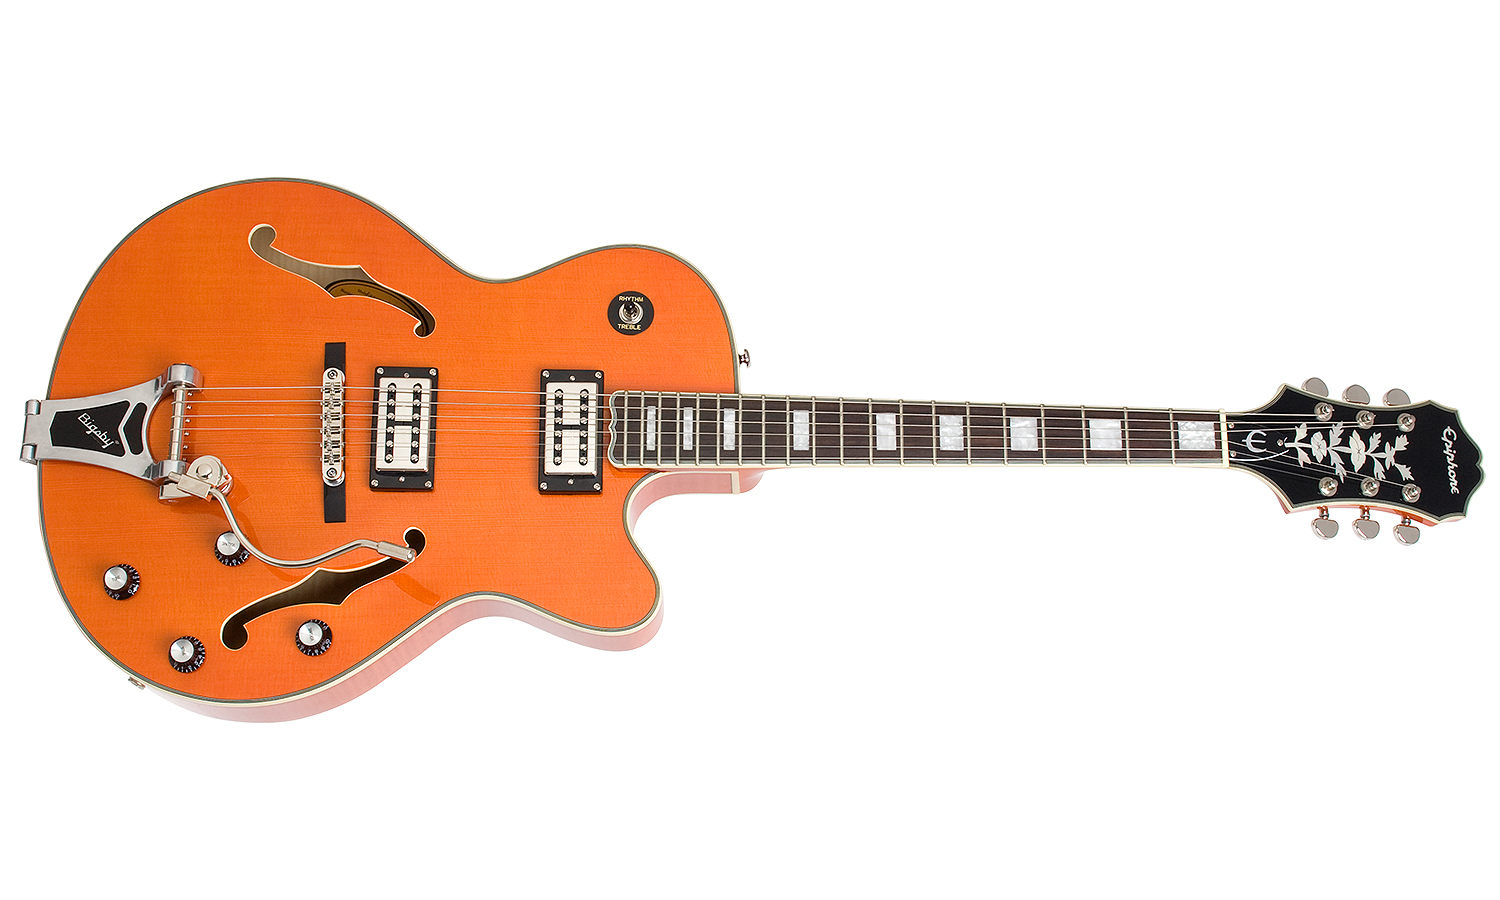 Epiphone Emperor Swingster Bigsby Gh - Sunrise Orange - Hollow-body electric guitar - Variation 1